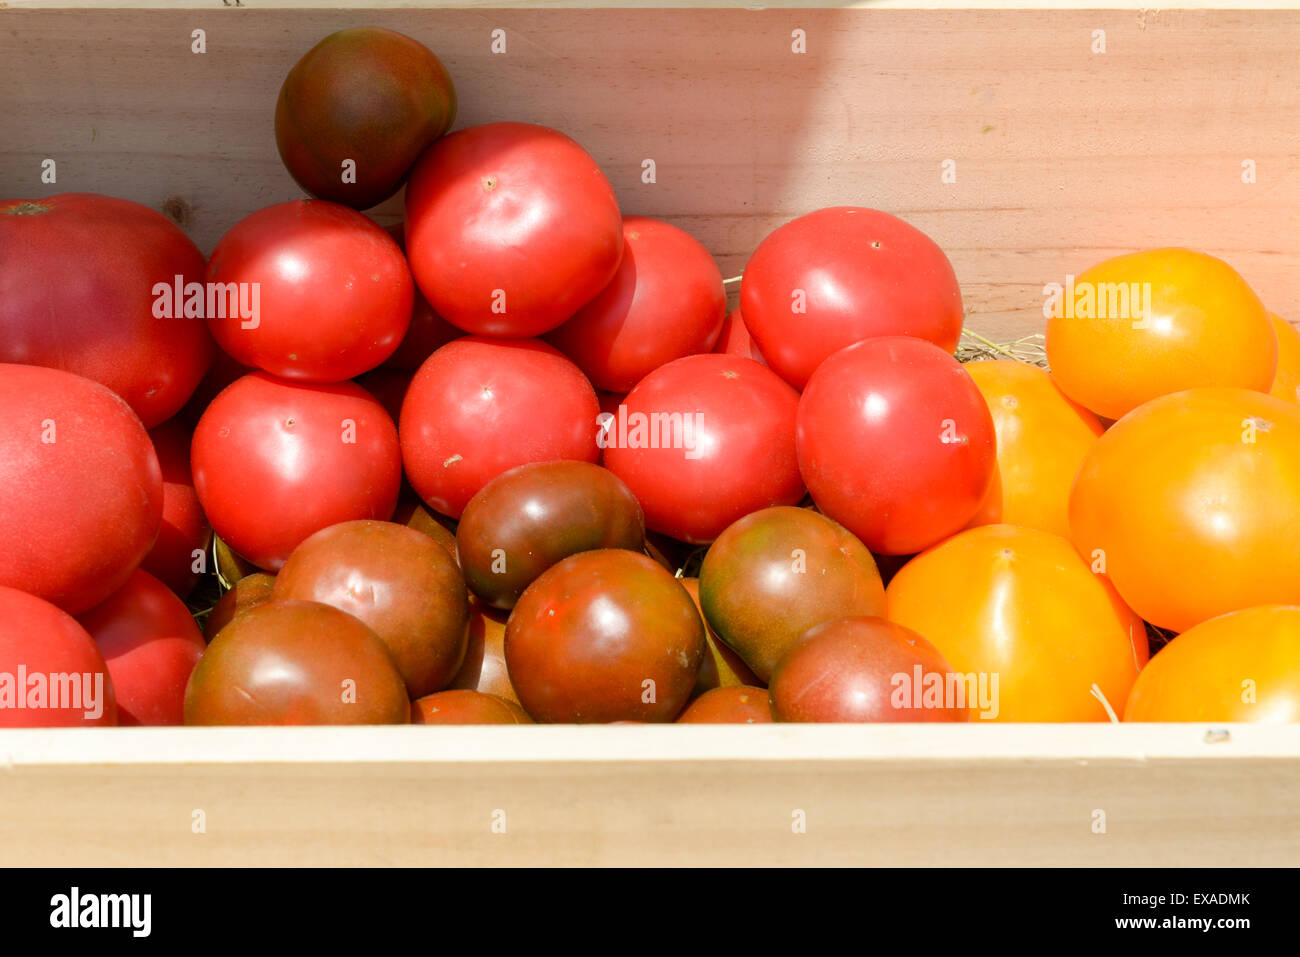 lot of red and yellow tomatoes in wooden crates Stock Photo